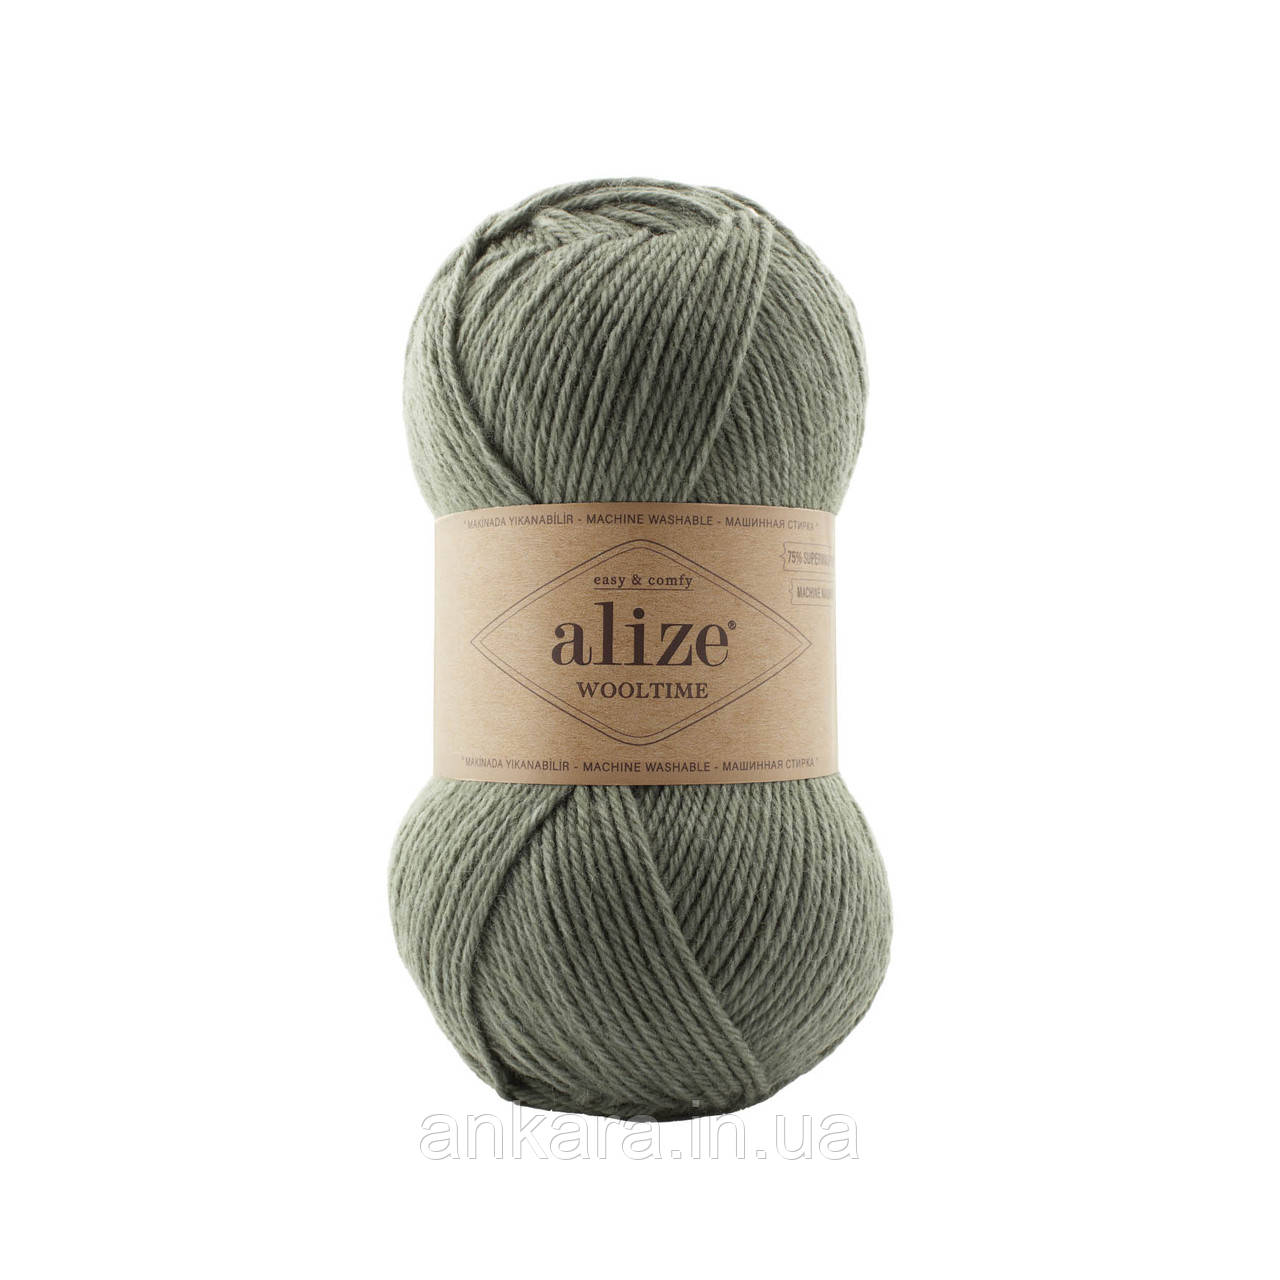 Alize Wooltime 274